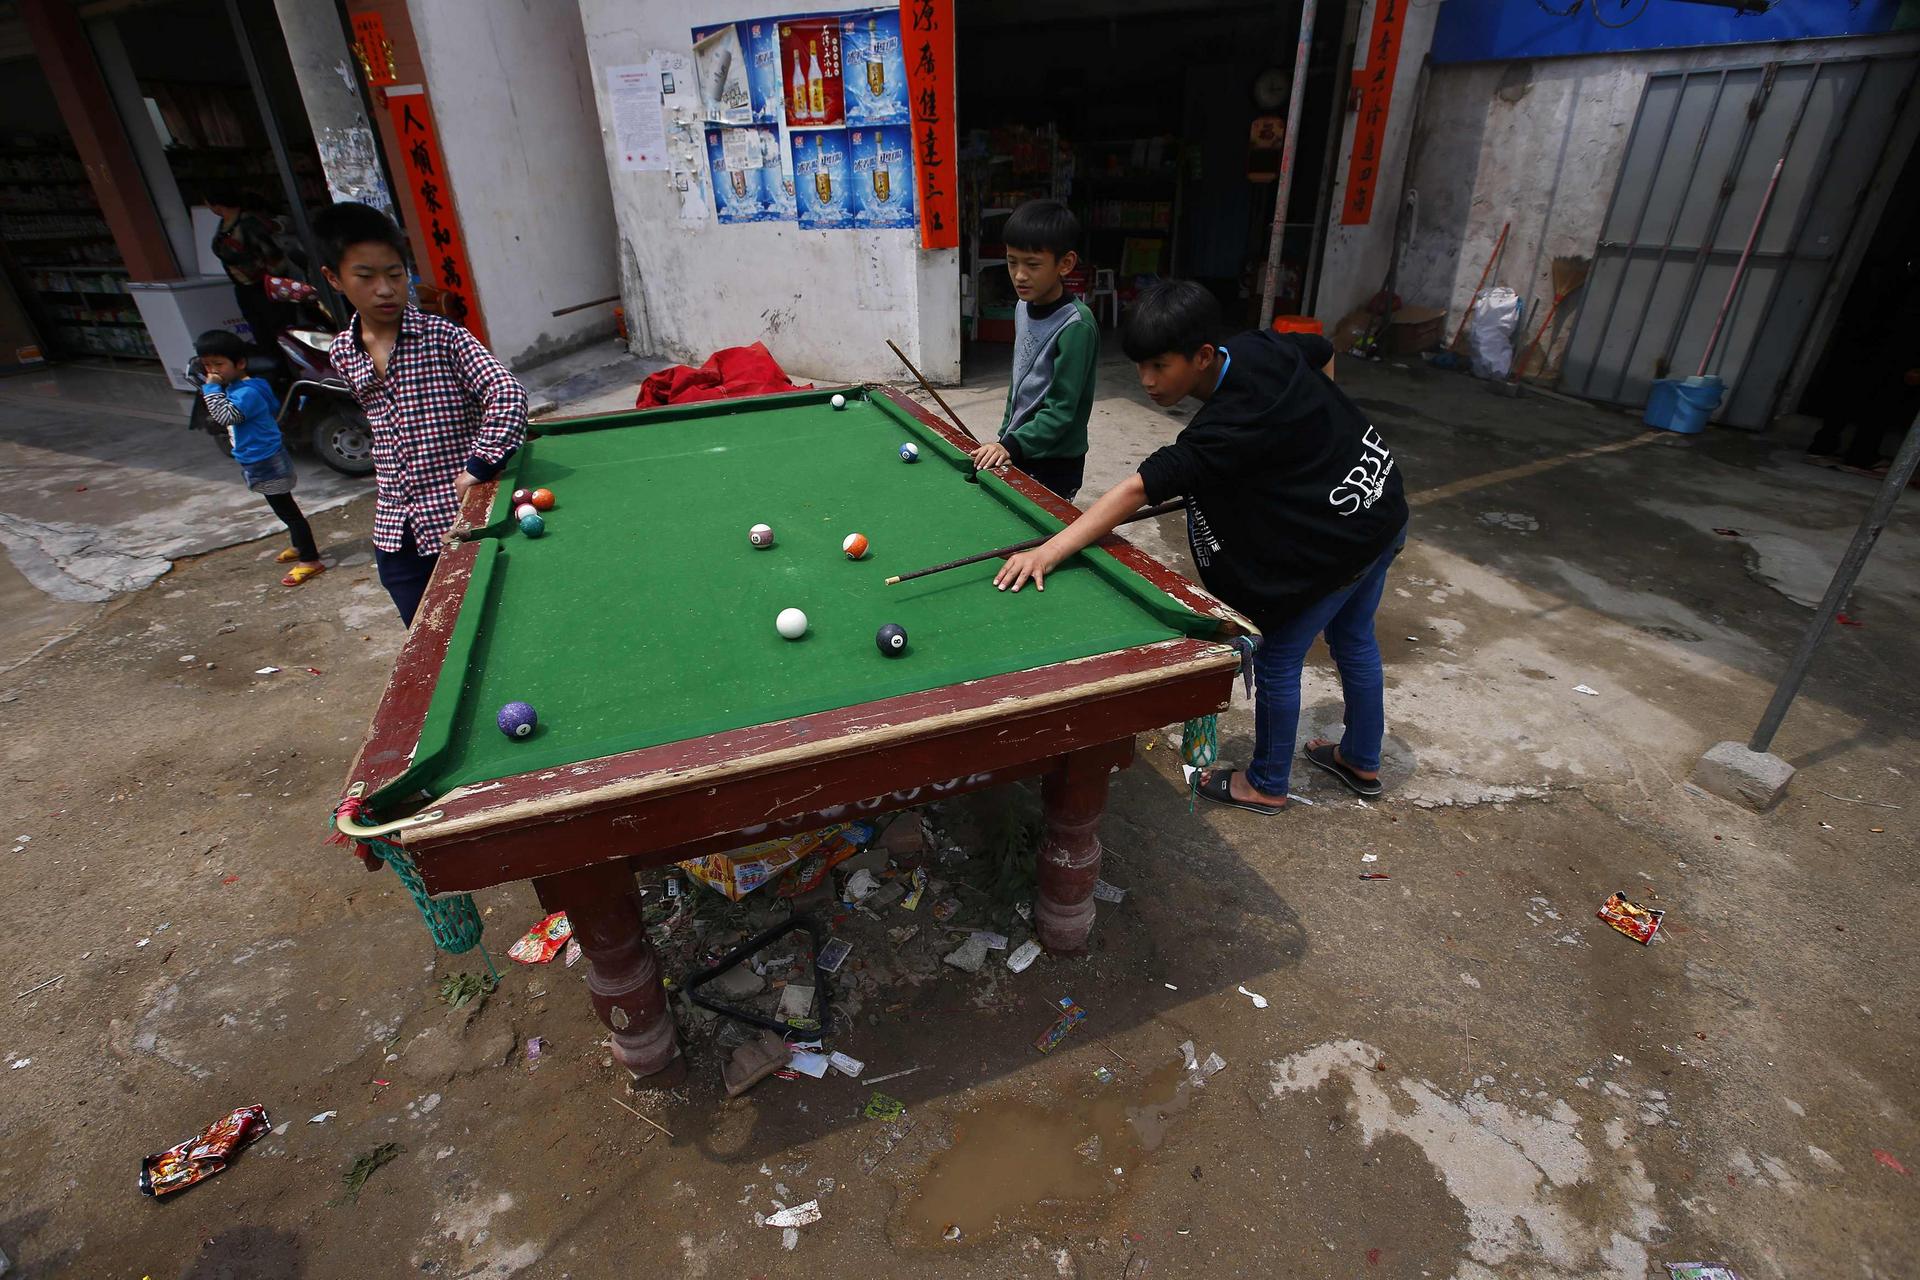 Children play pool in Wukan village on Sunday. Photo: Reuters